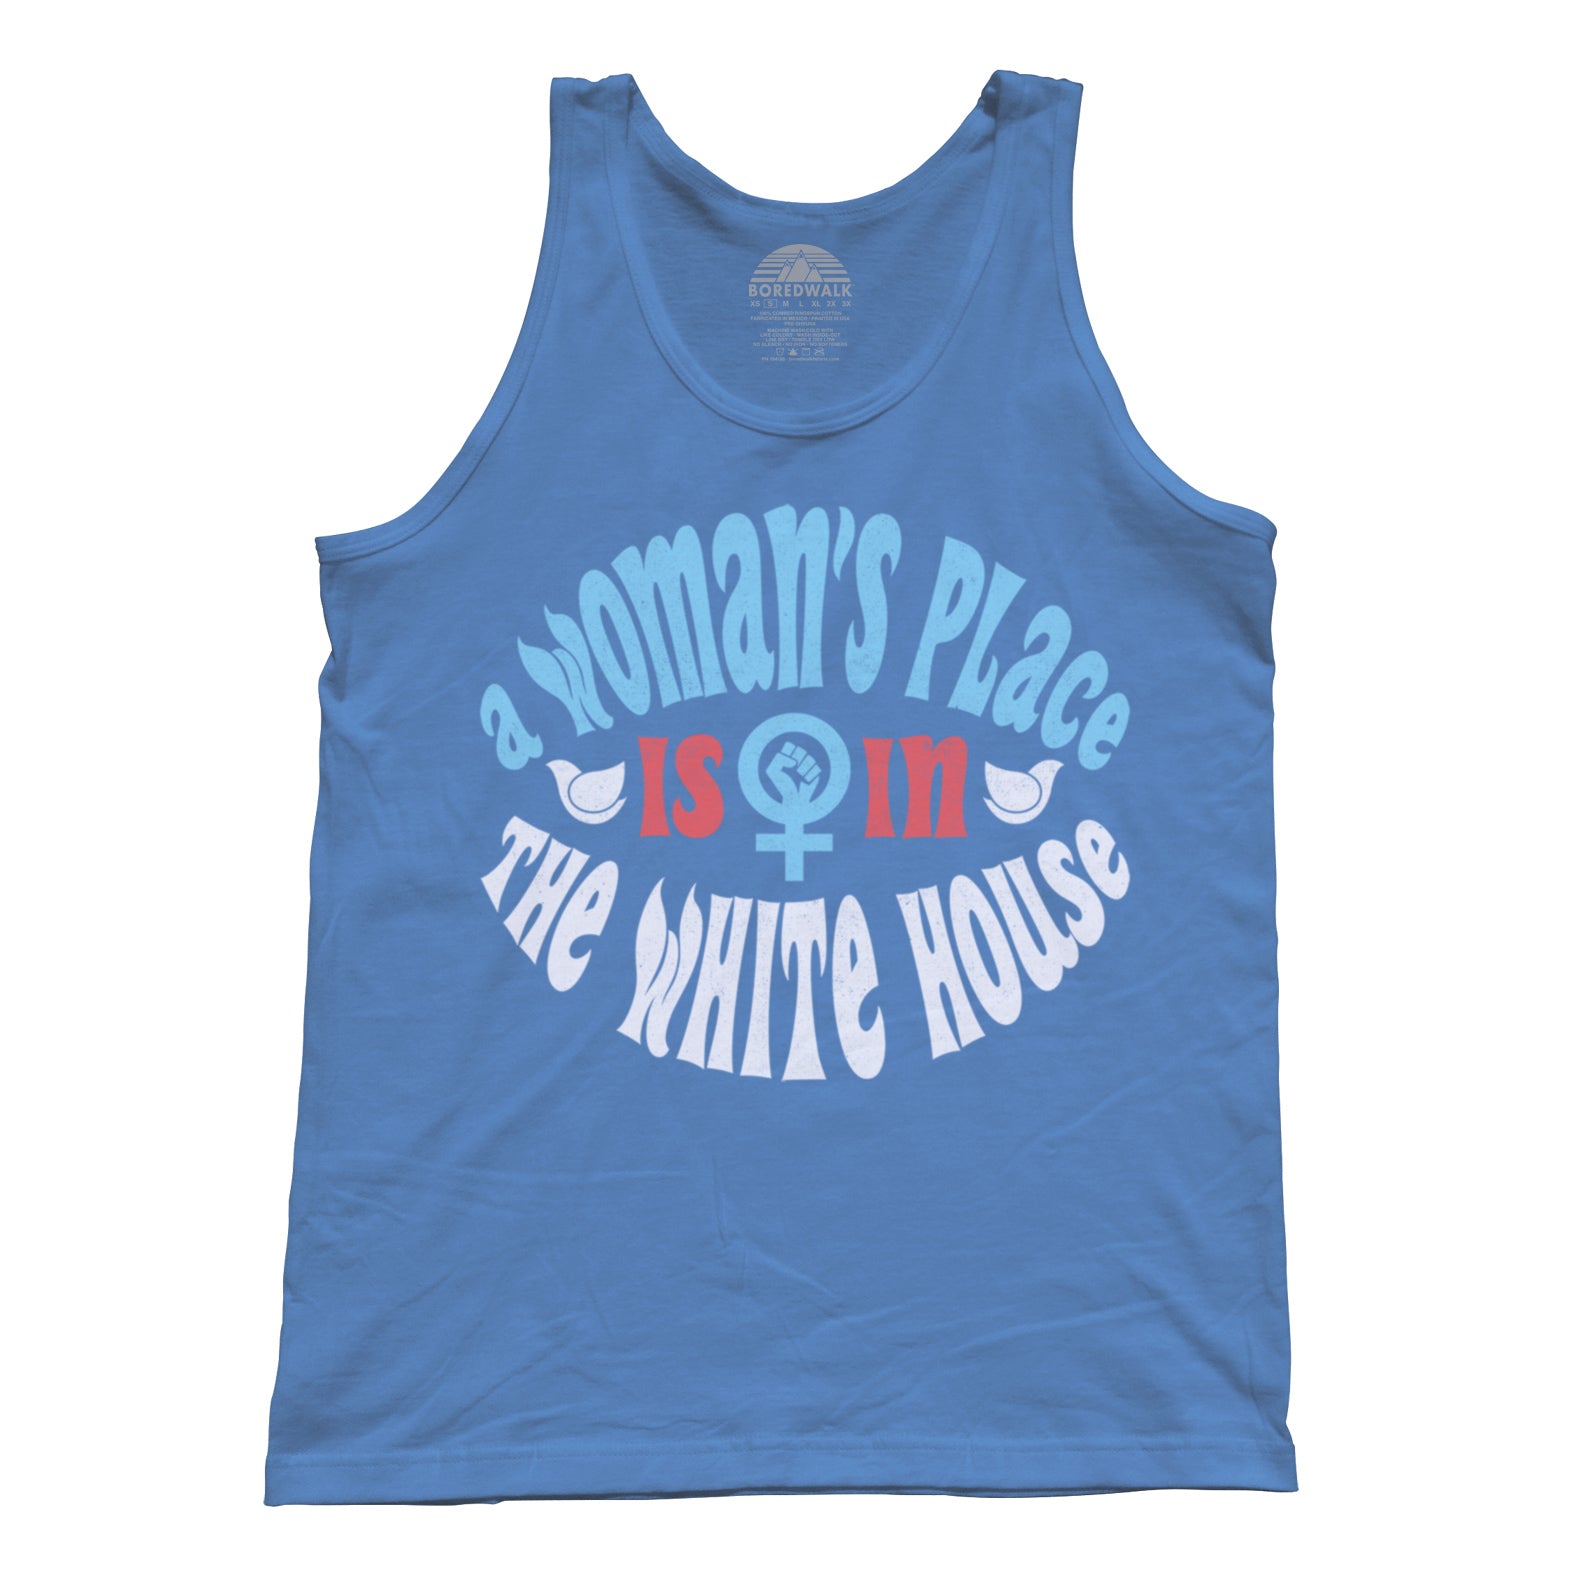 Unisex A Woman's Place is in The White House Tank Top